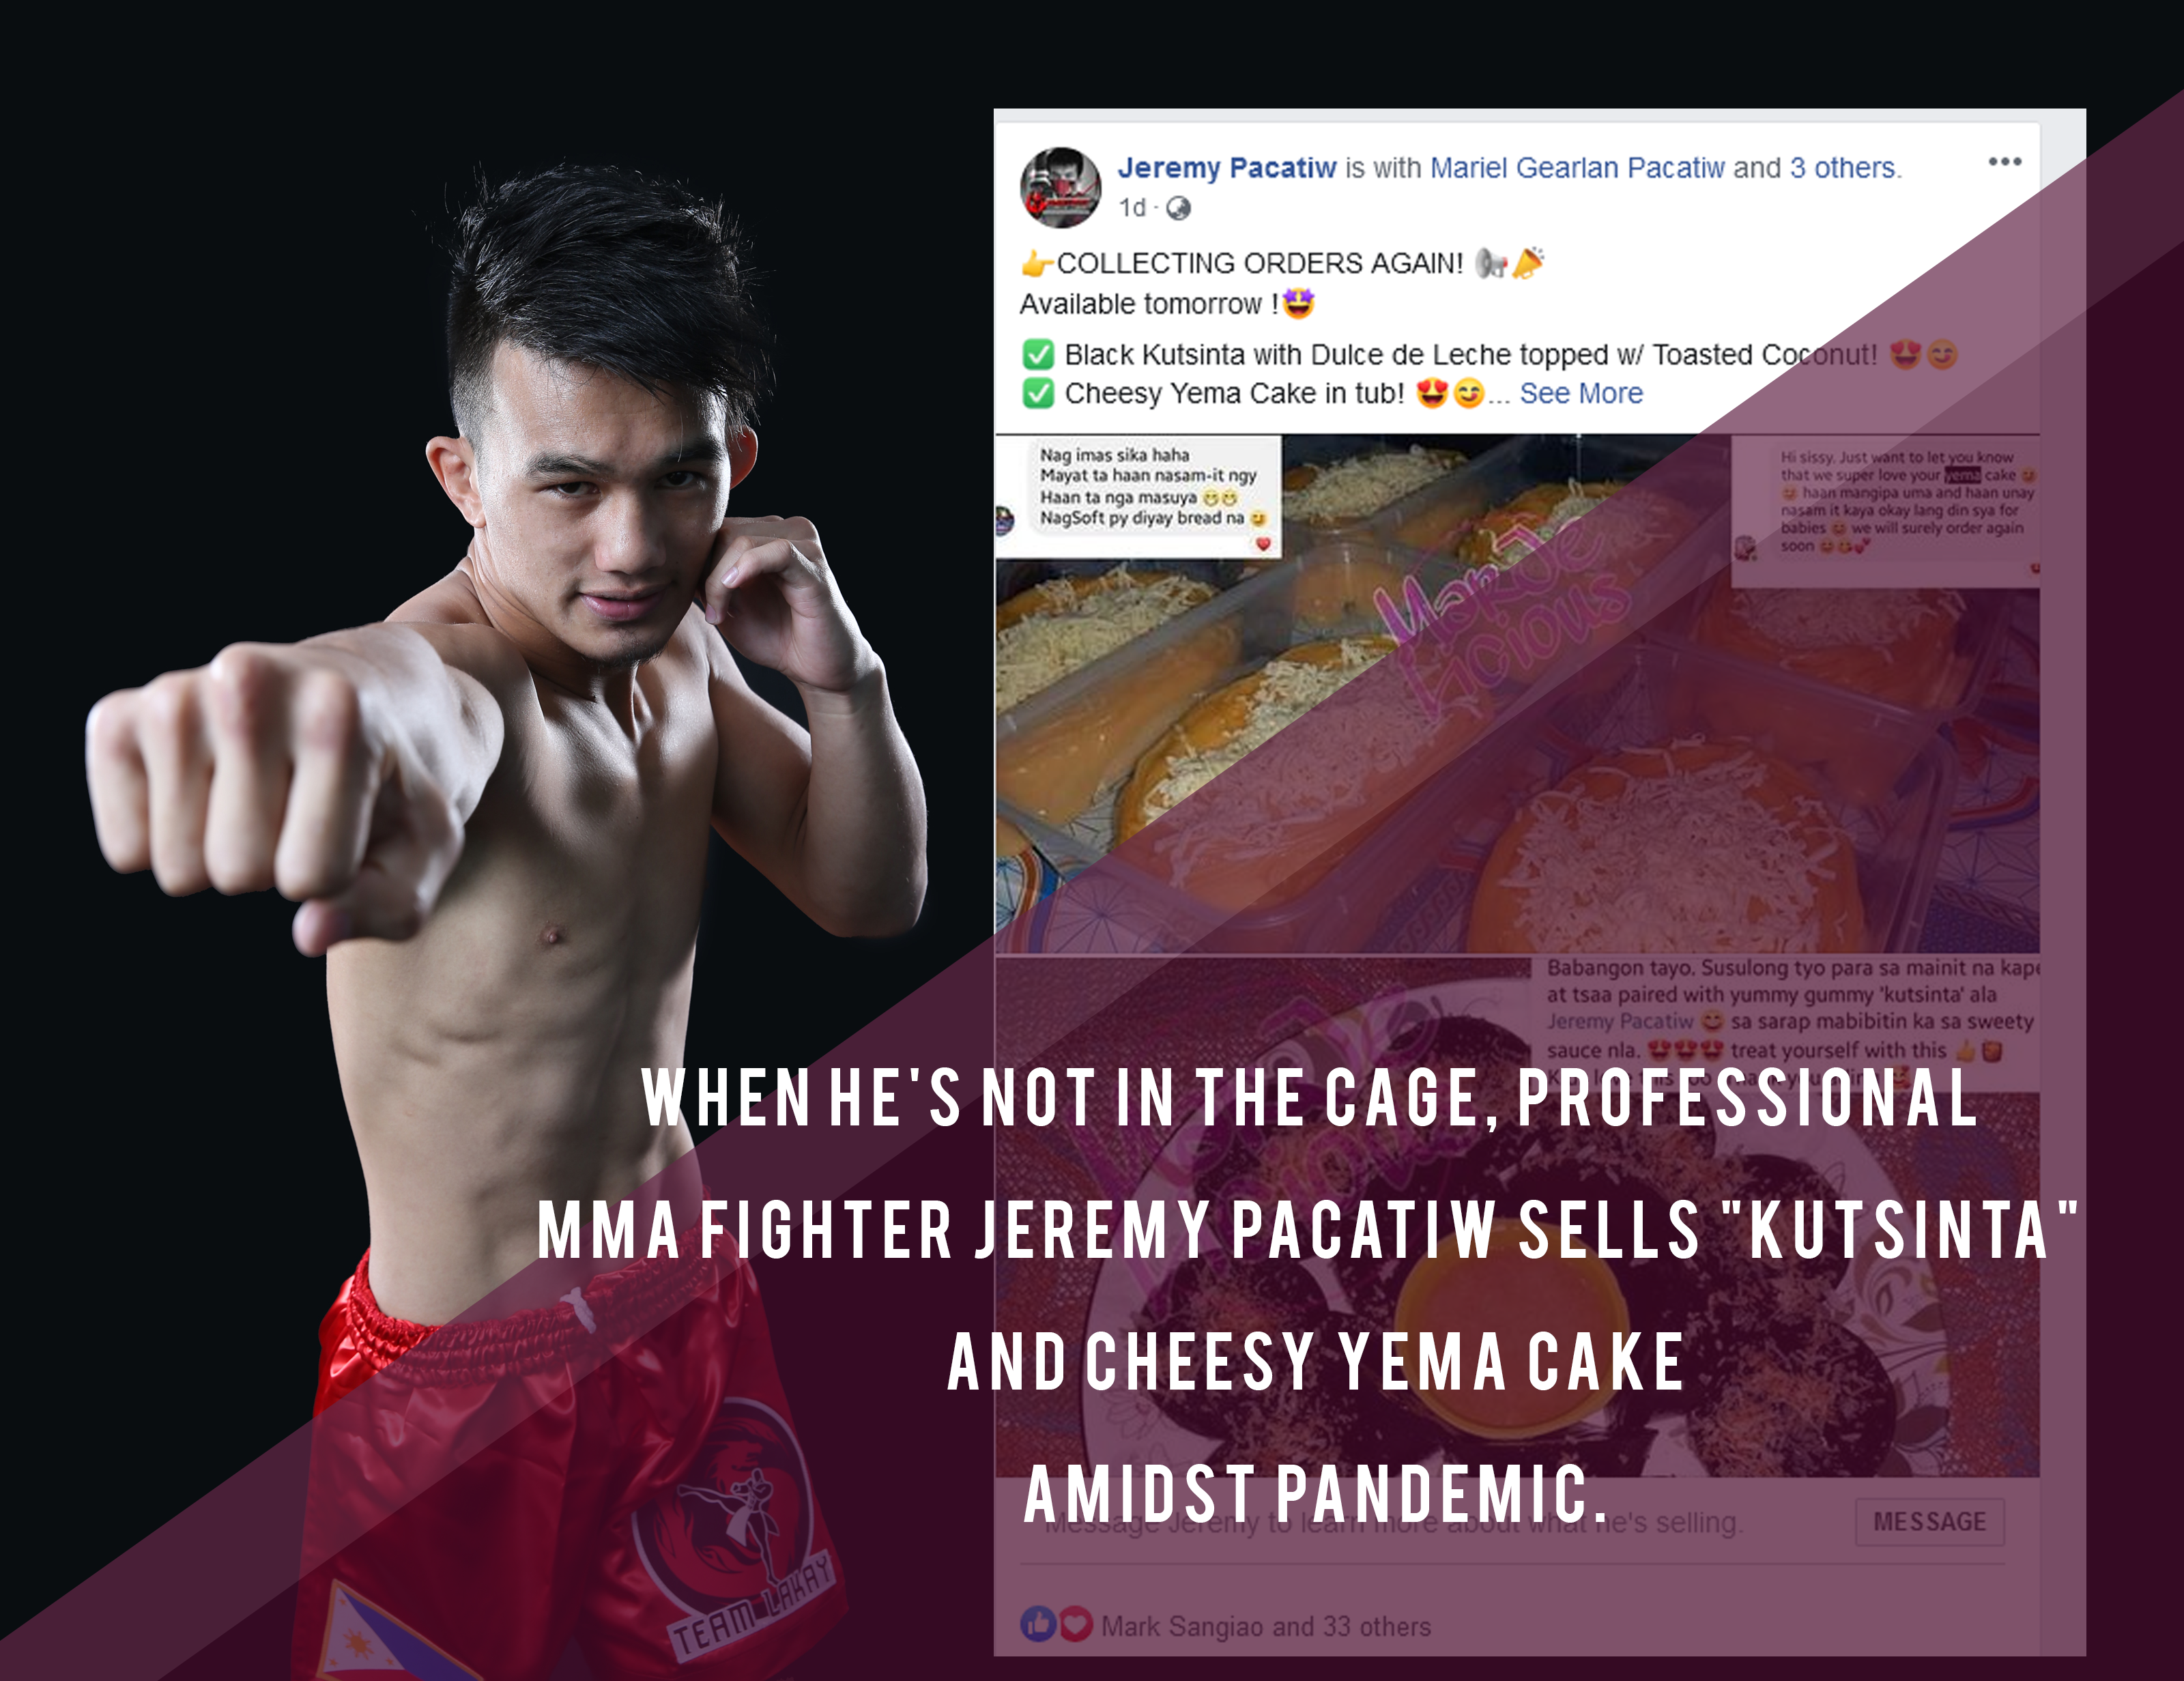 When he’s not in the cage, Professional MMA Fighter Jeremy Pacatiw sells Black Kutsinta and Cheesy Yema Cake amidst pandemic